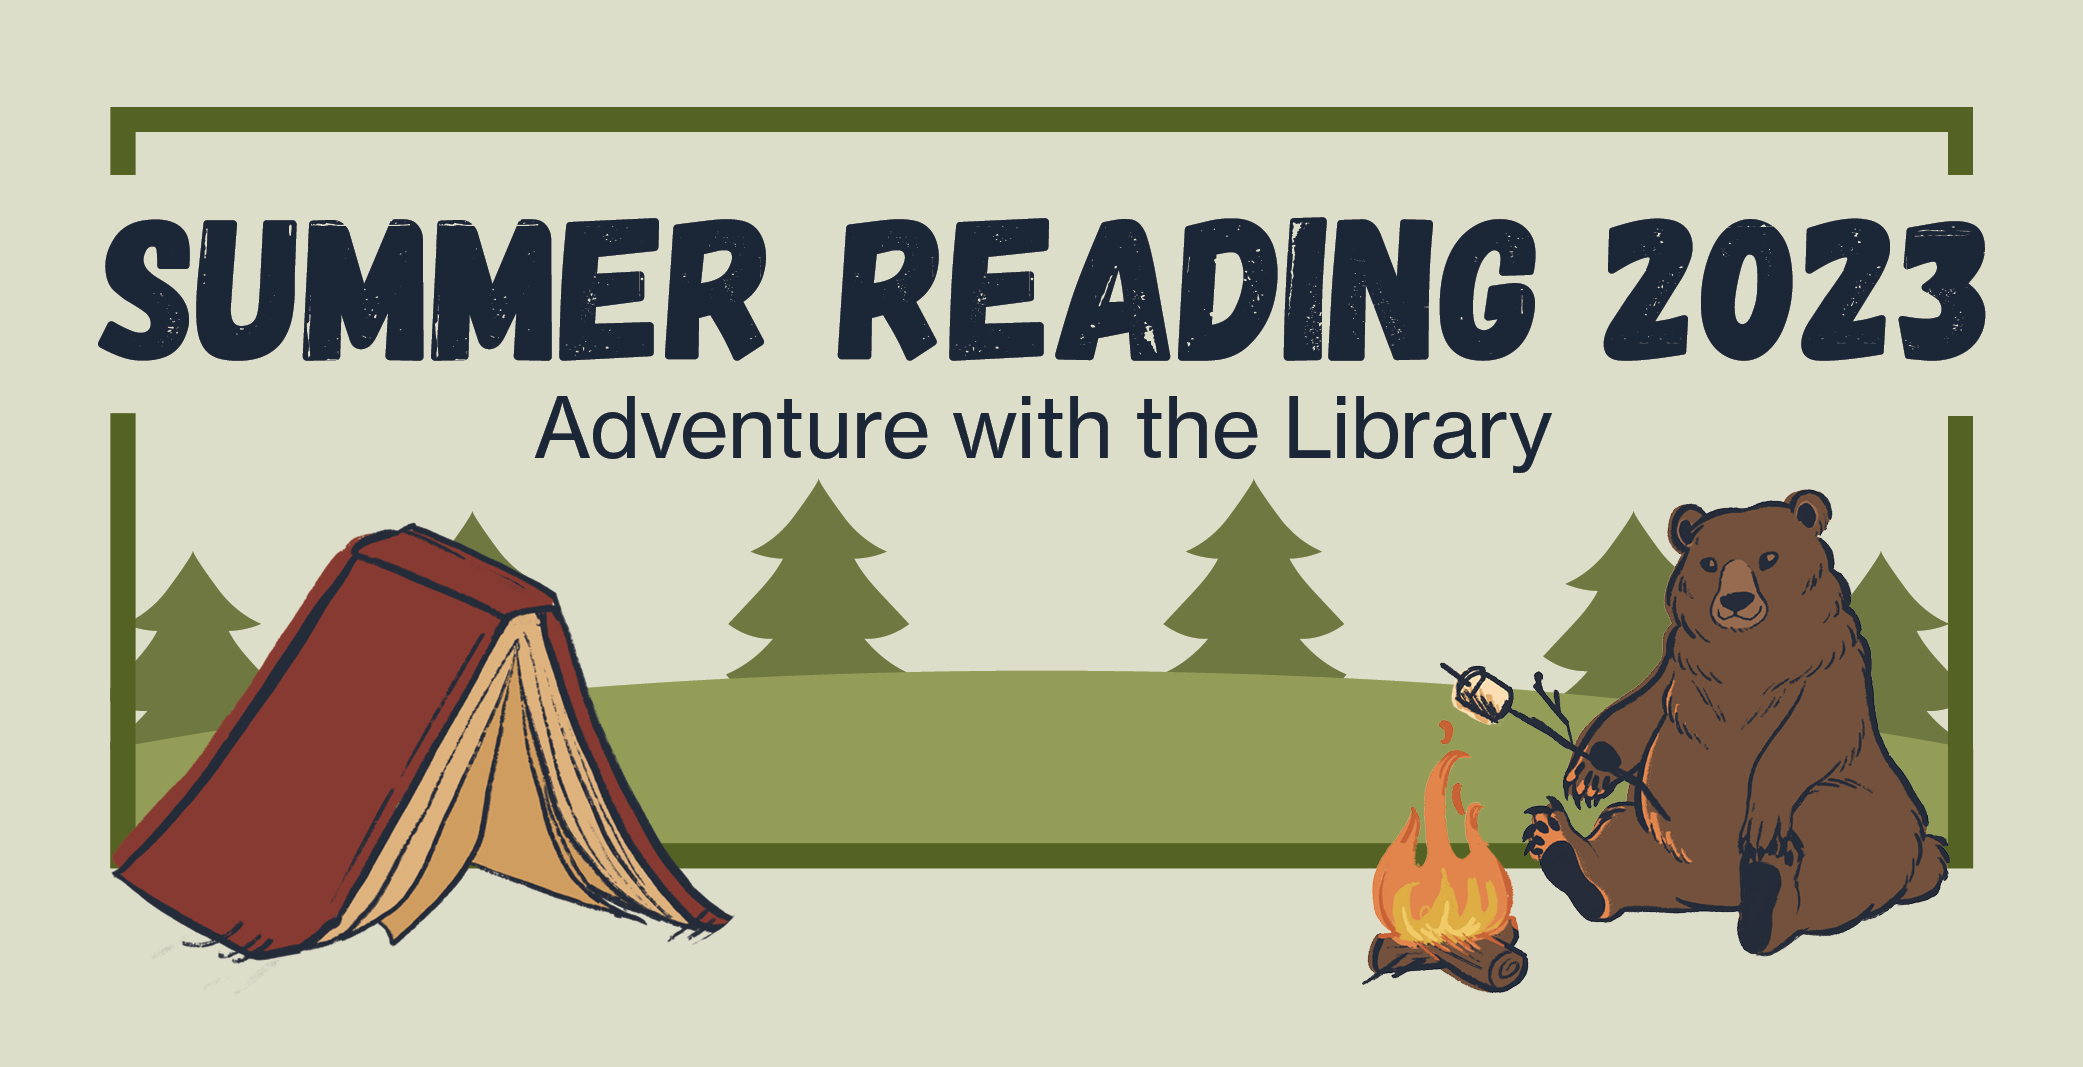 Summer reading 2023 - click to go to the summer reading landing page